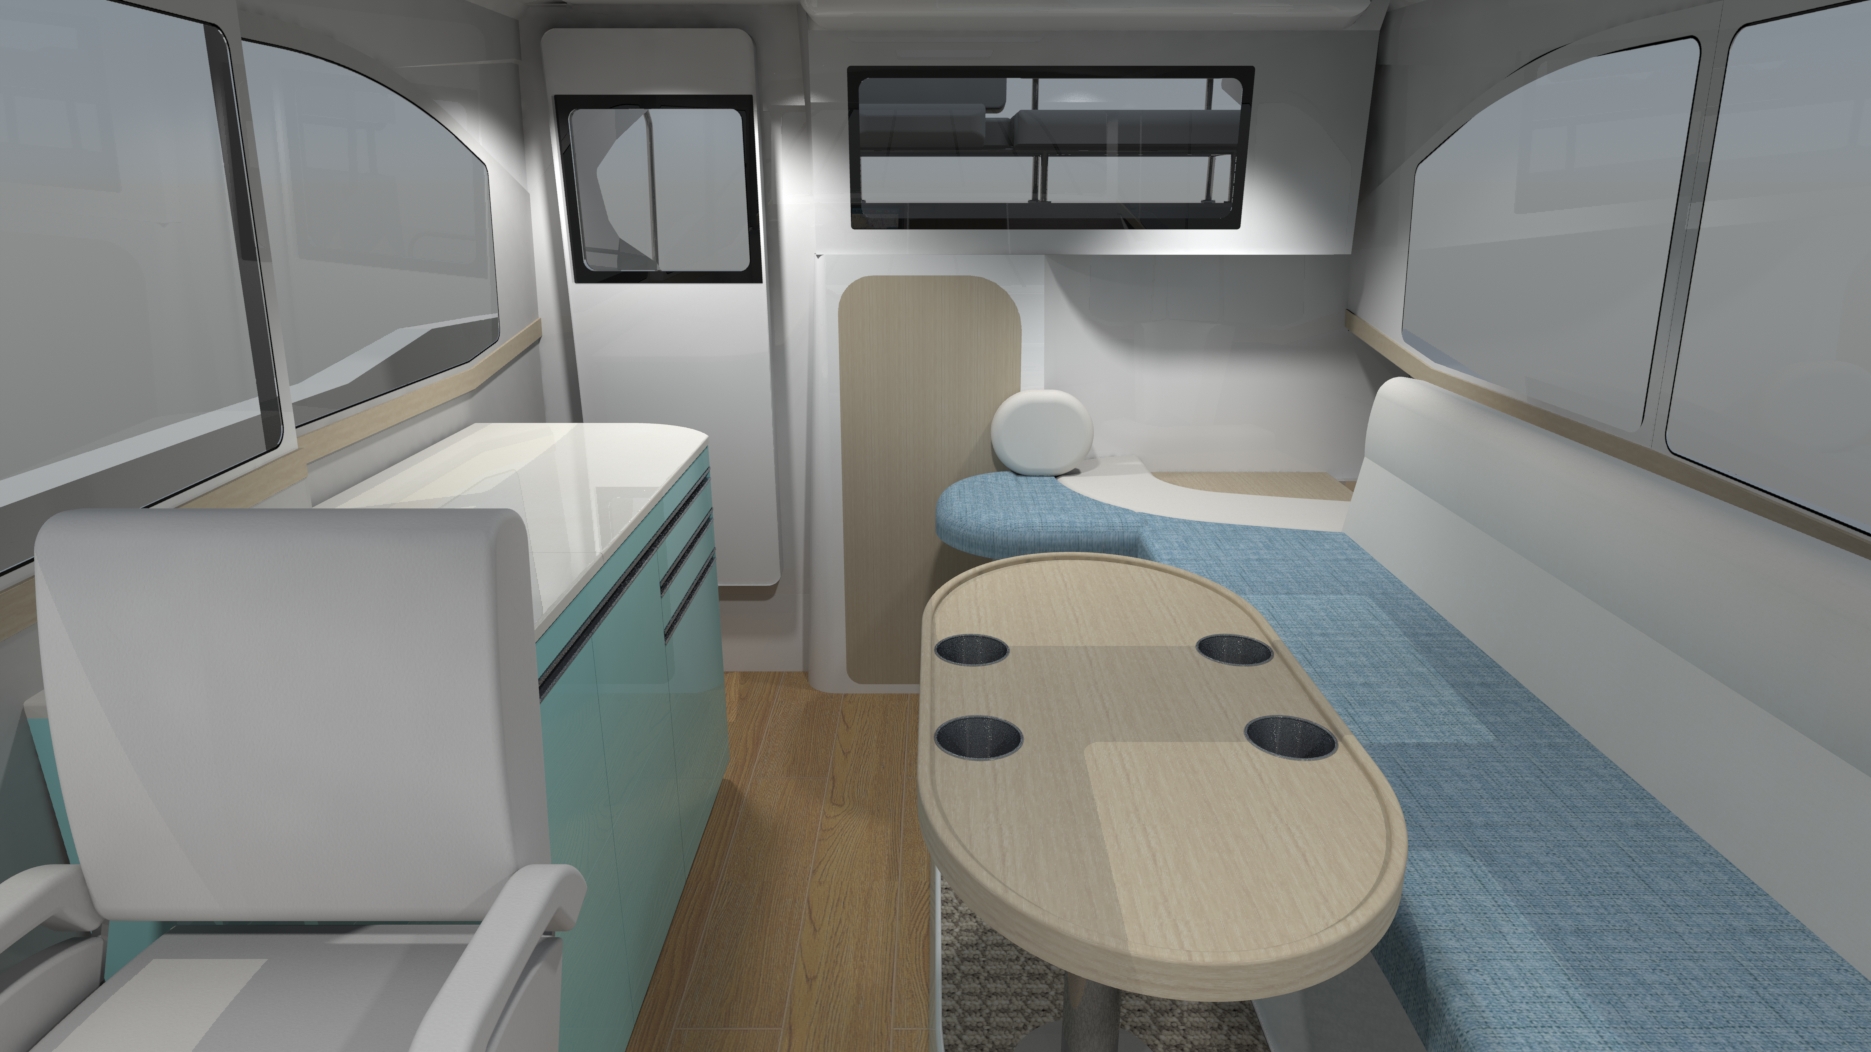 Rear of cabin. Long sofa and table are arranged.